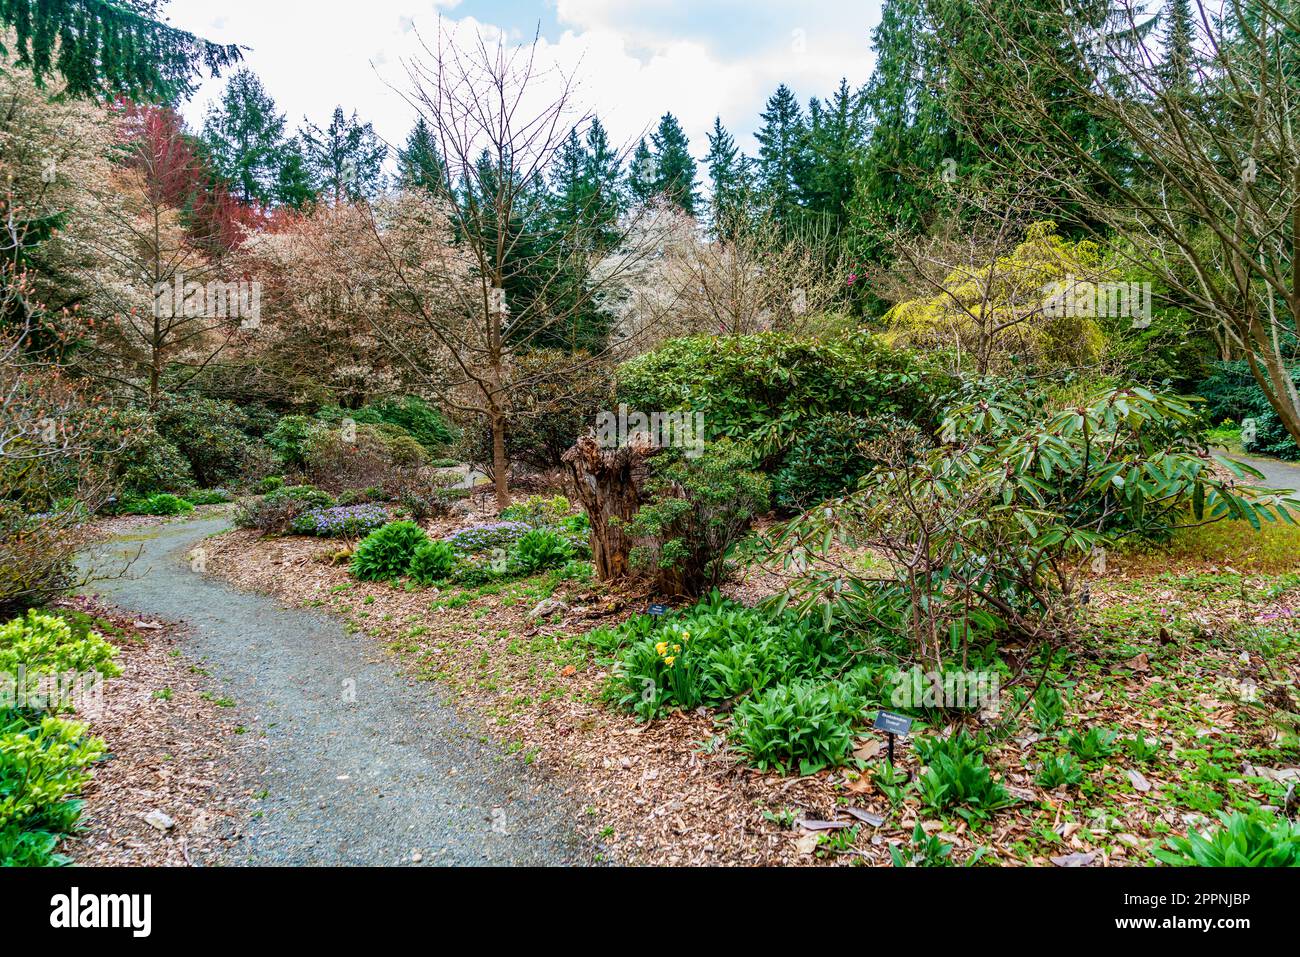 Landscape at the Rhododendron Speices Botanical Garden in Federal Way, Washington. Stock Photo